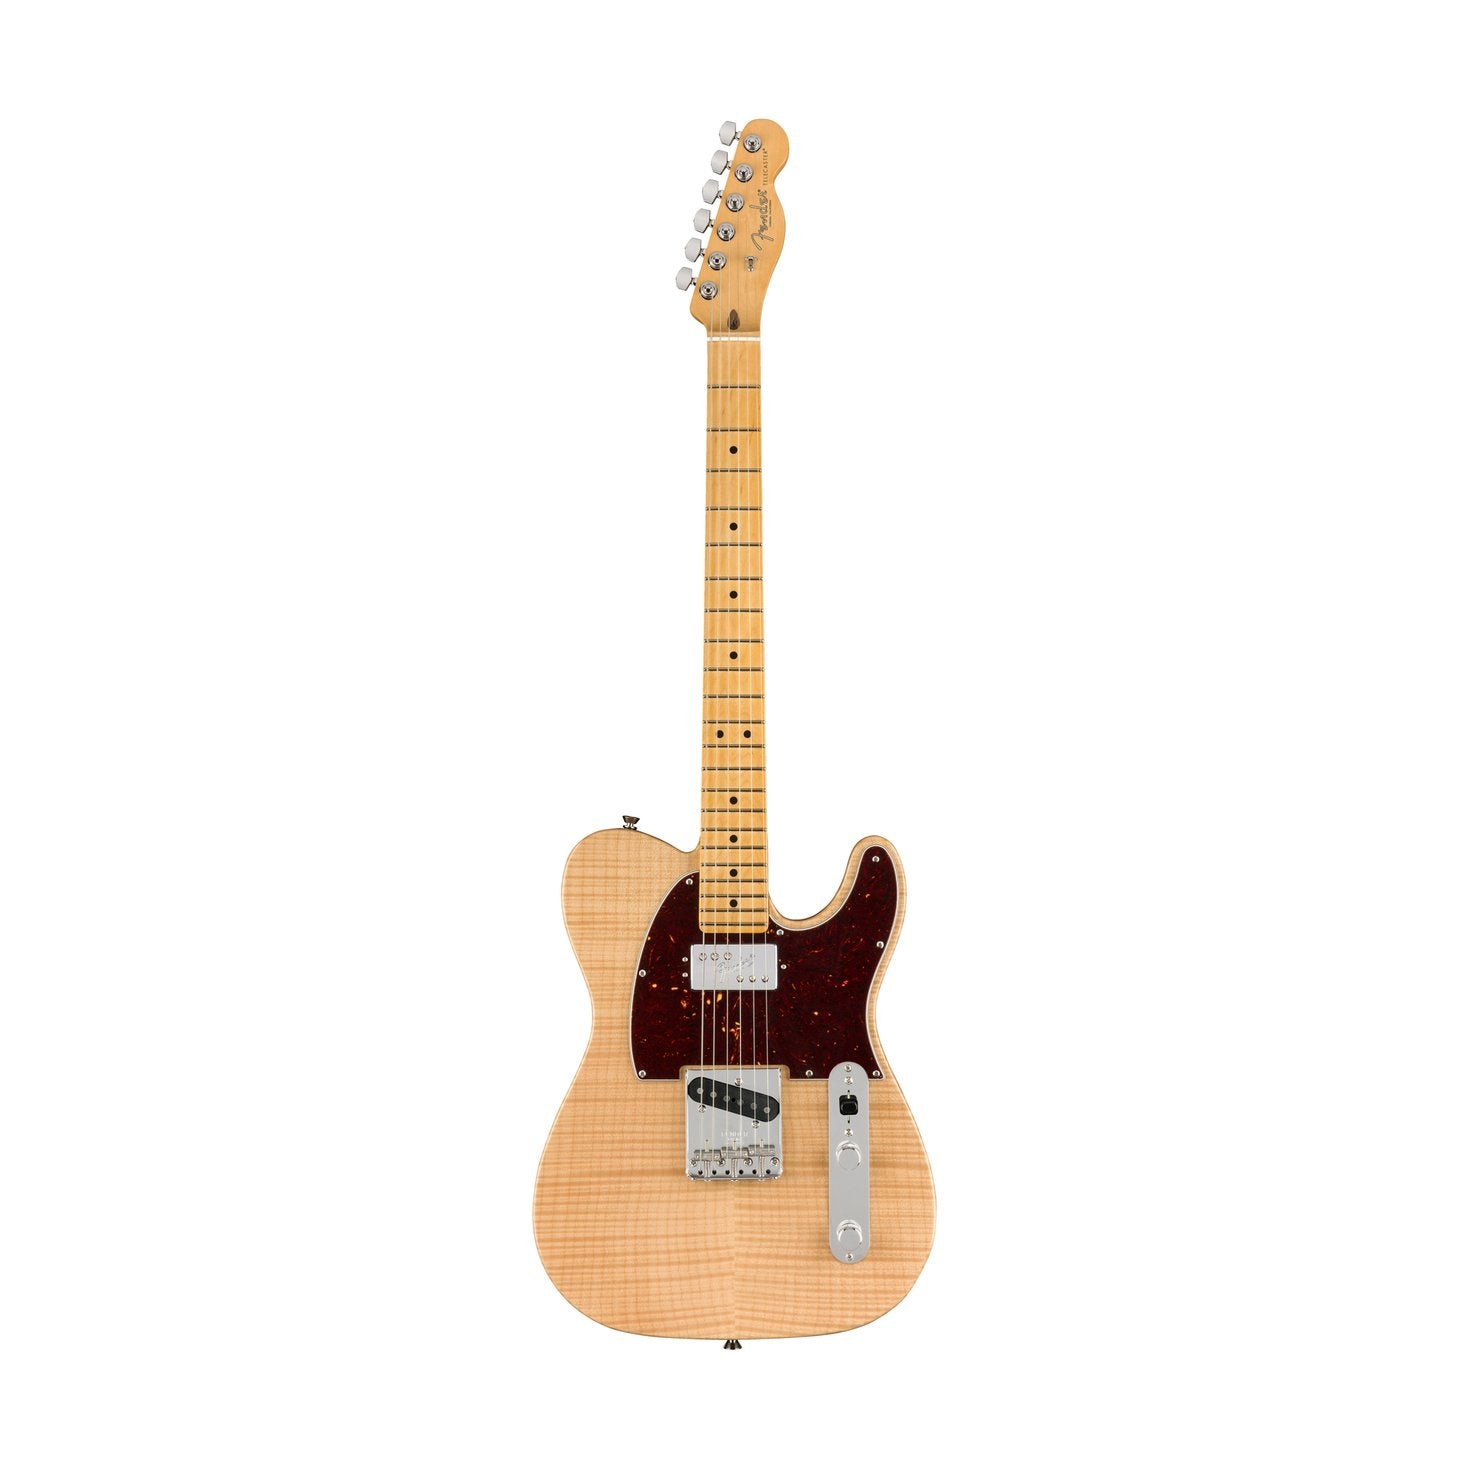 Fender Ltd Ed Rarities Flame Maple Top Chambered Telecaster Telecaster Electric Guitar, Natural, FENDER, ELECTRIC GUITAR, fender-electric-guitar-f03-017-6505-821, ZOSO MUSIC SDN BHD